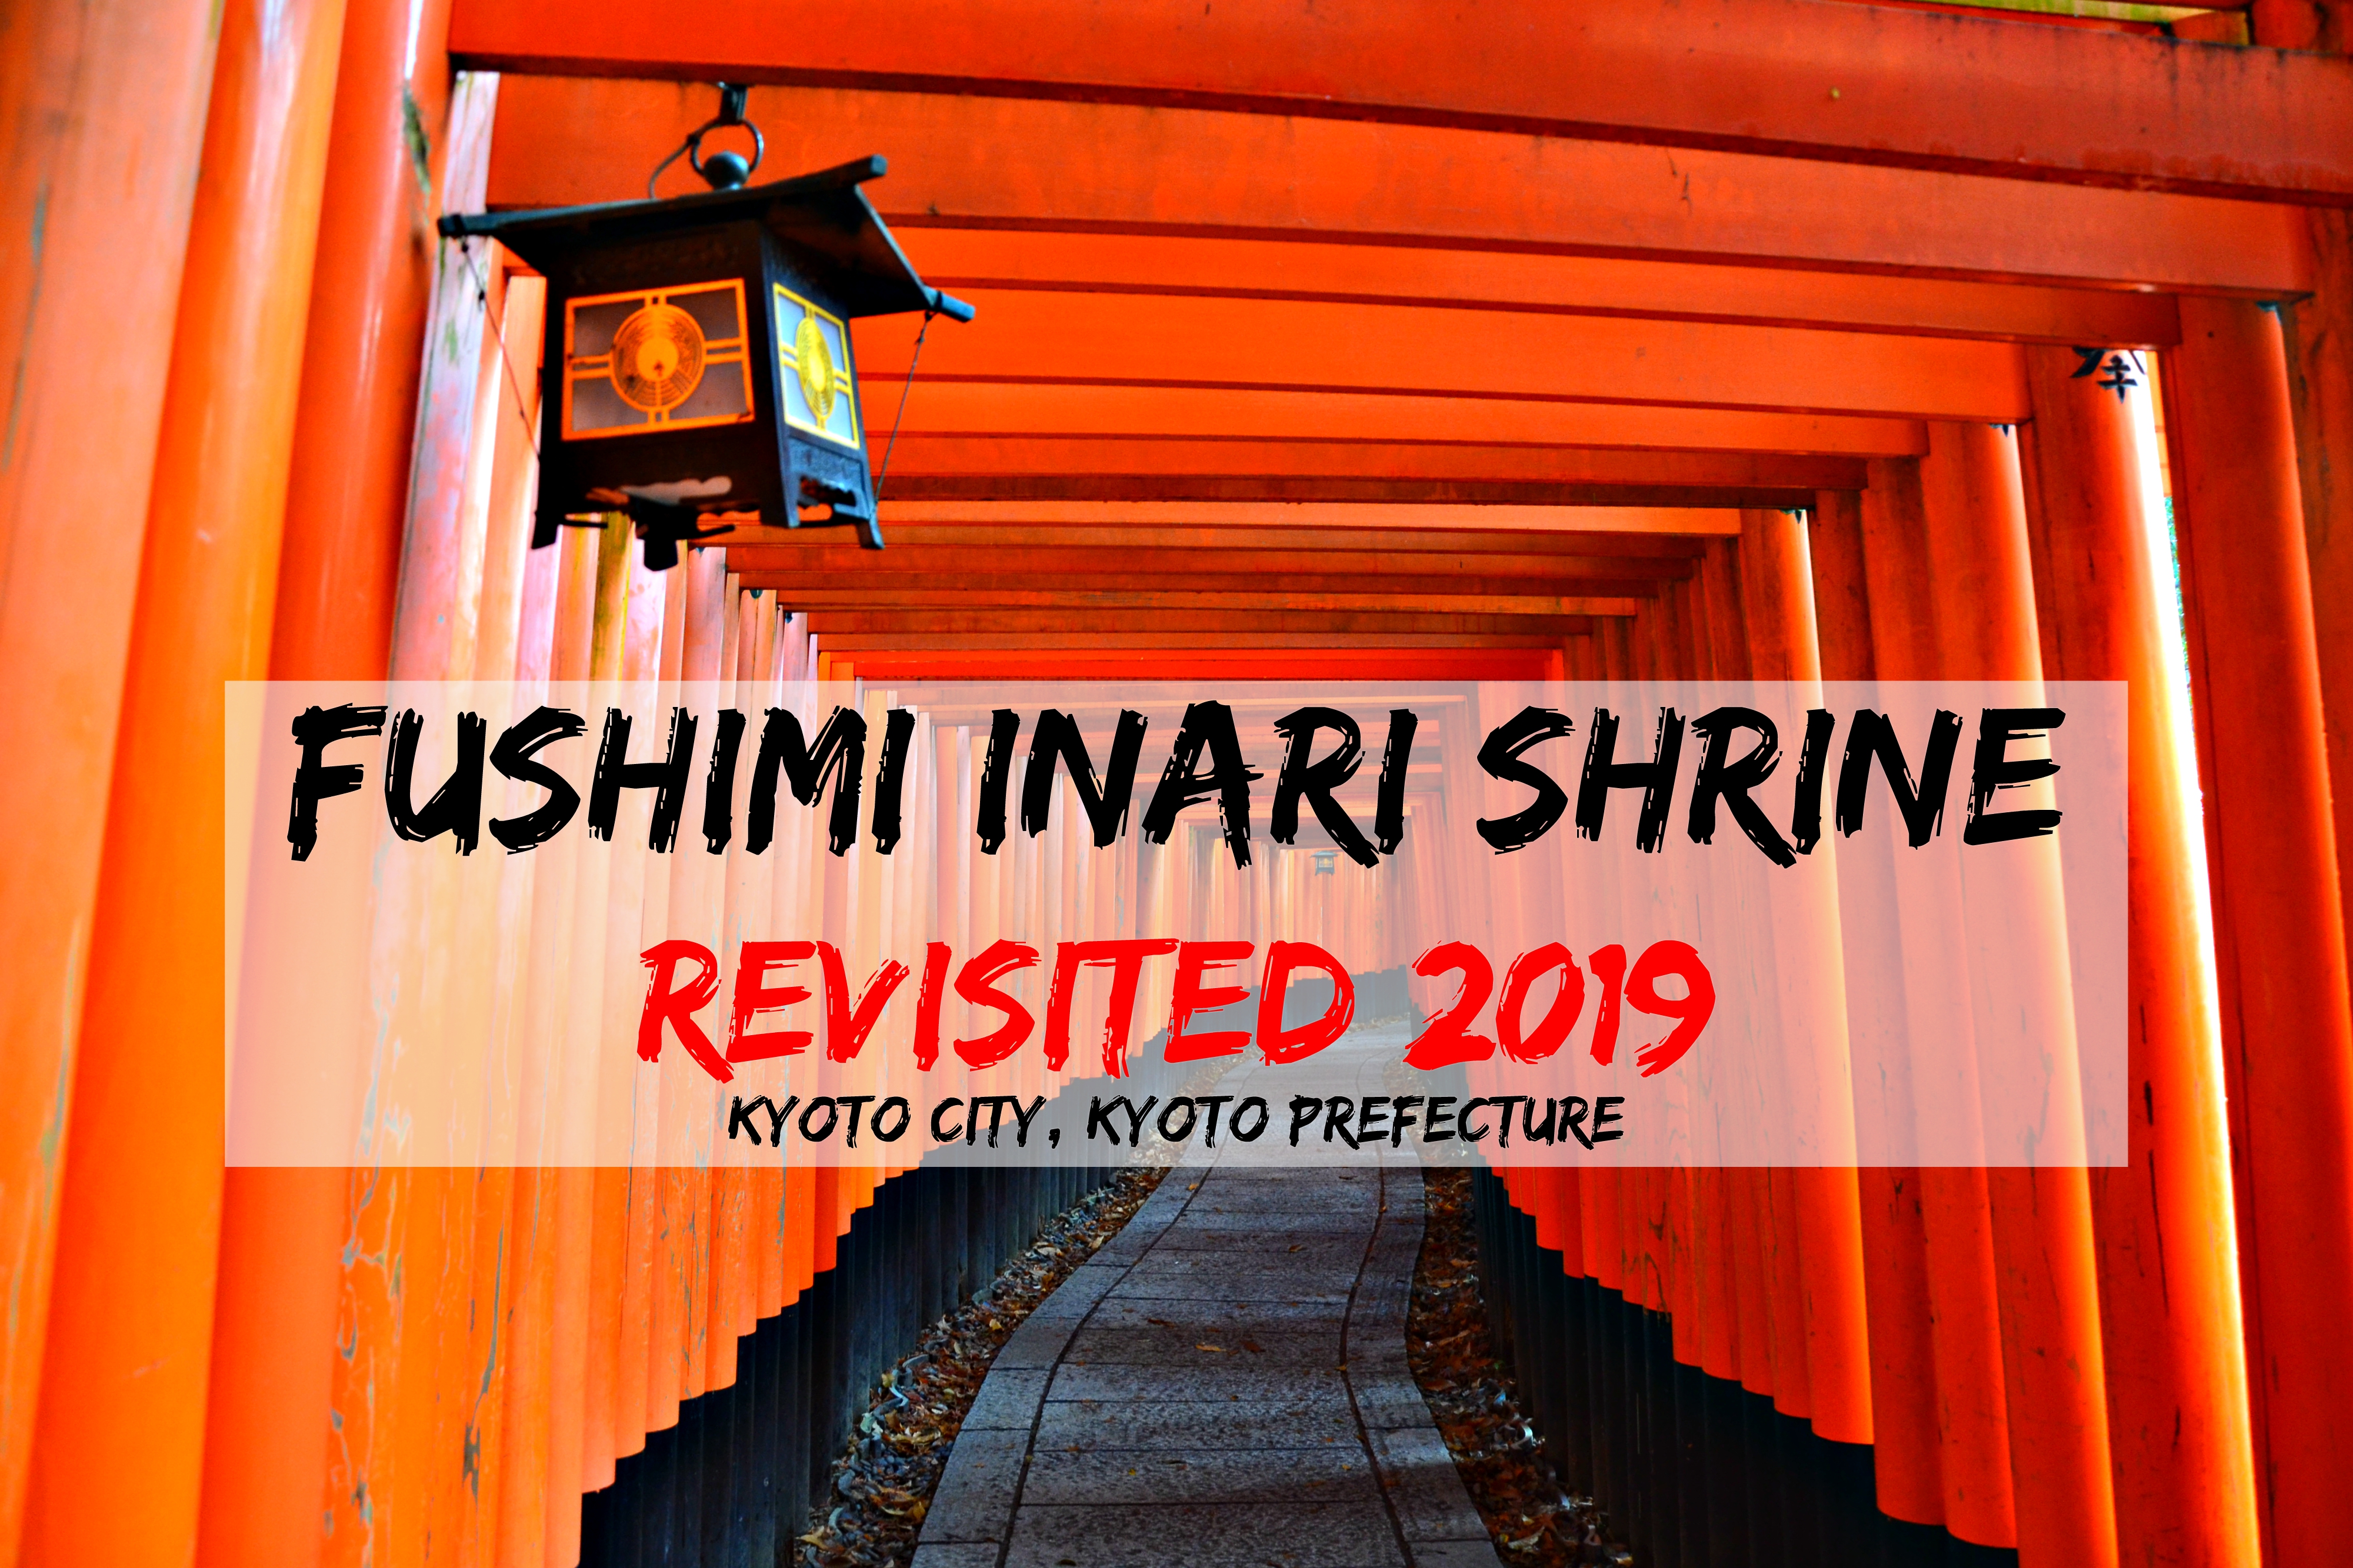 Probably the most famous shrine in Kyoto, Fushimi Inari Shrine is known for the thousands of torii in its vicinity.